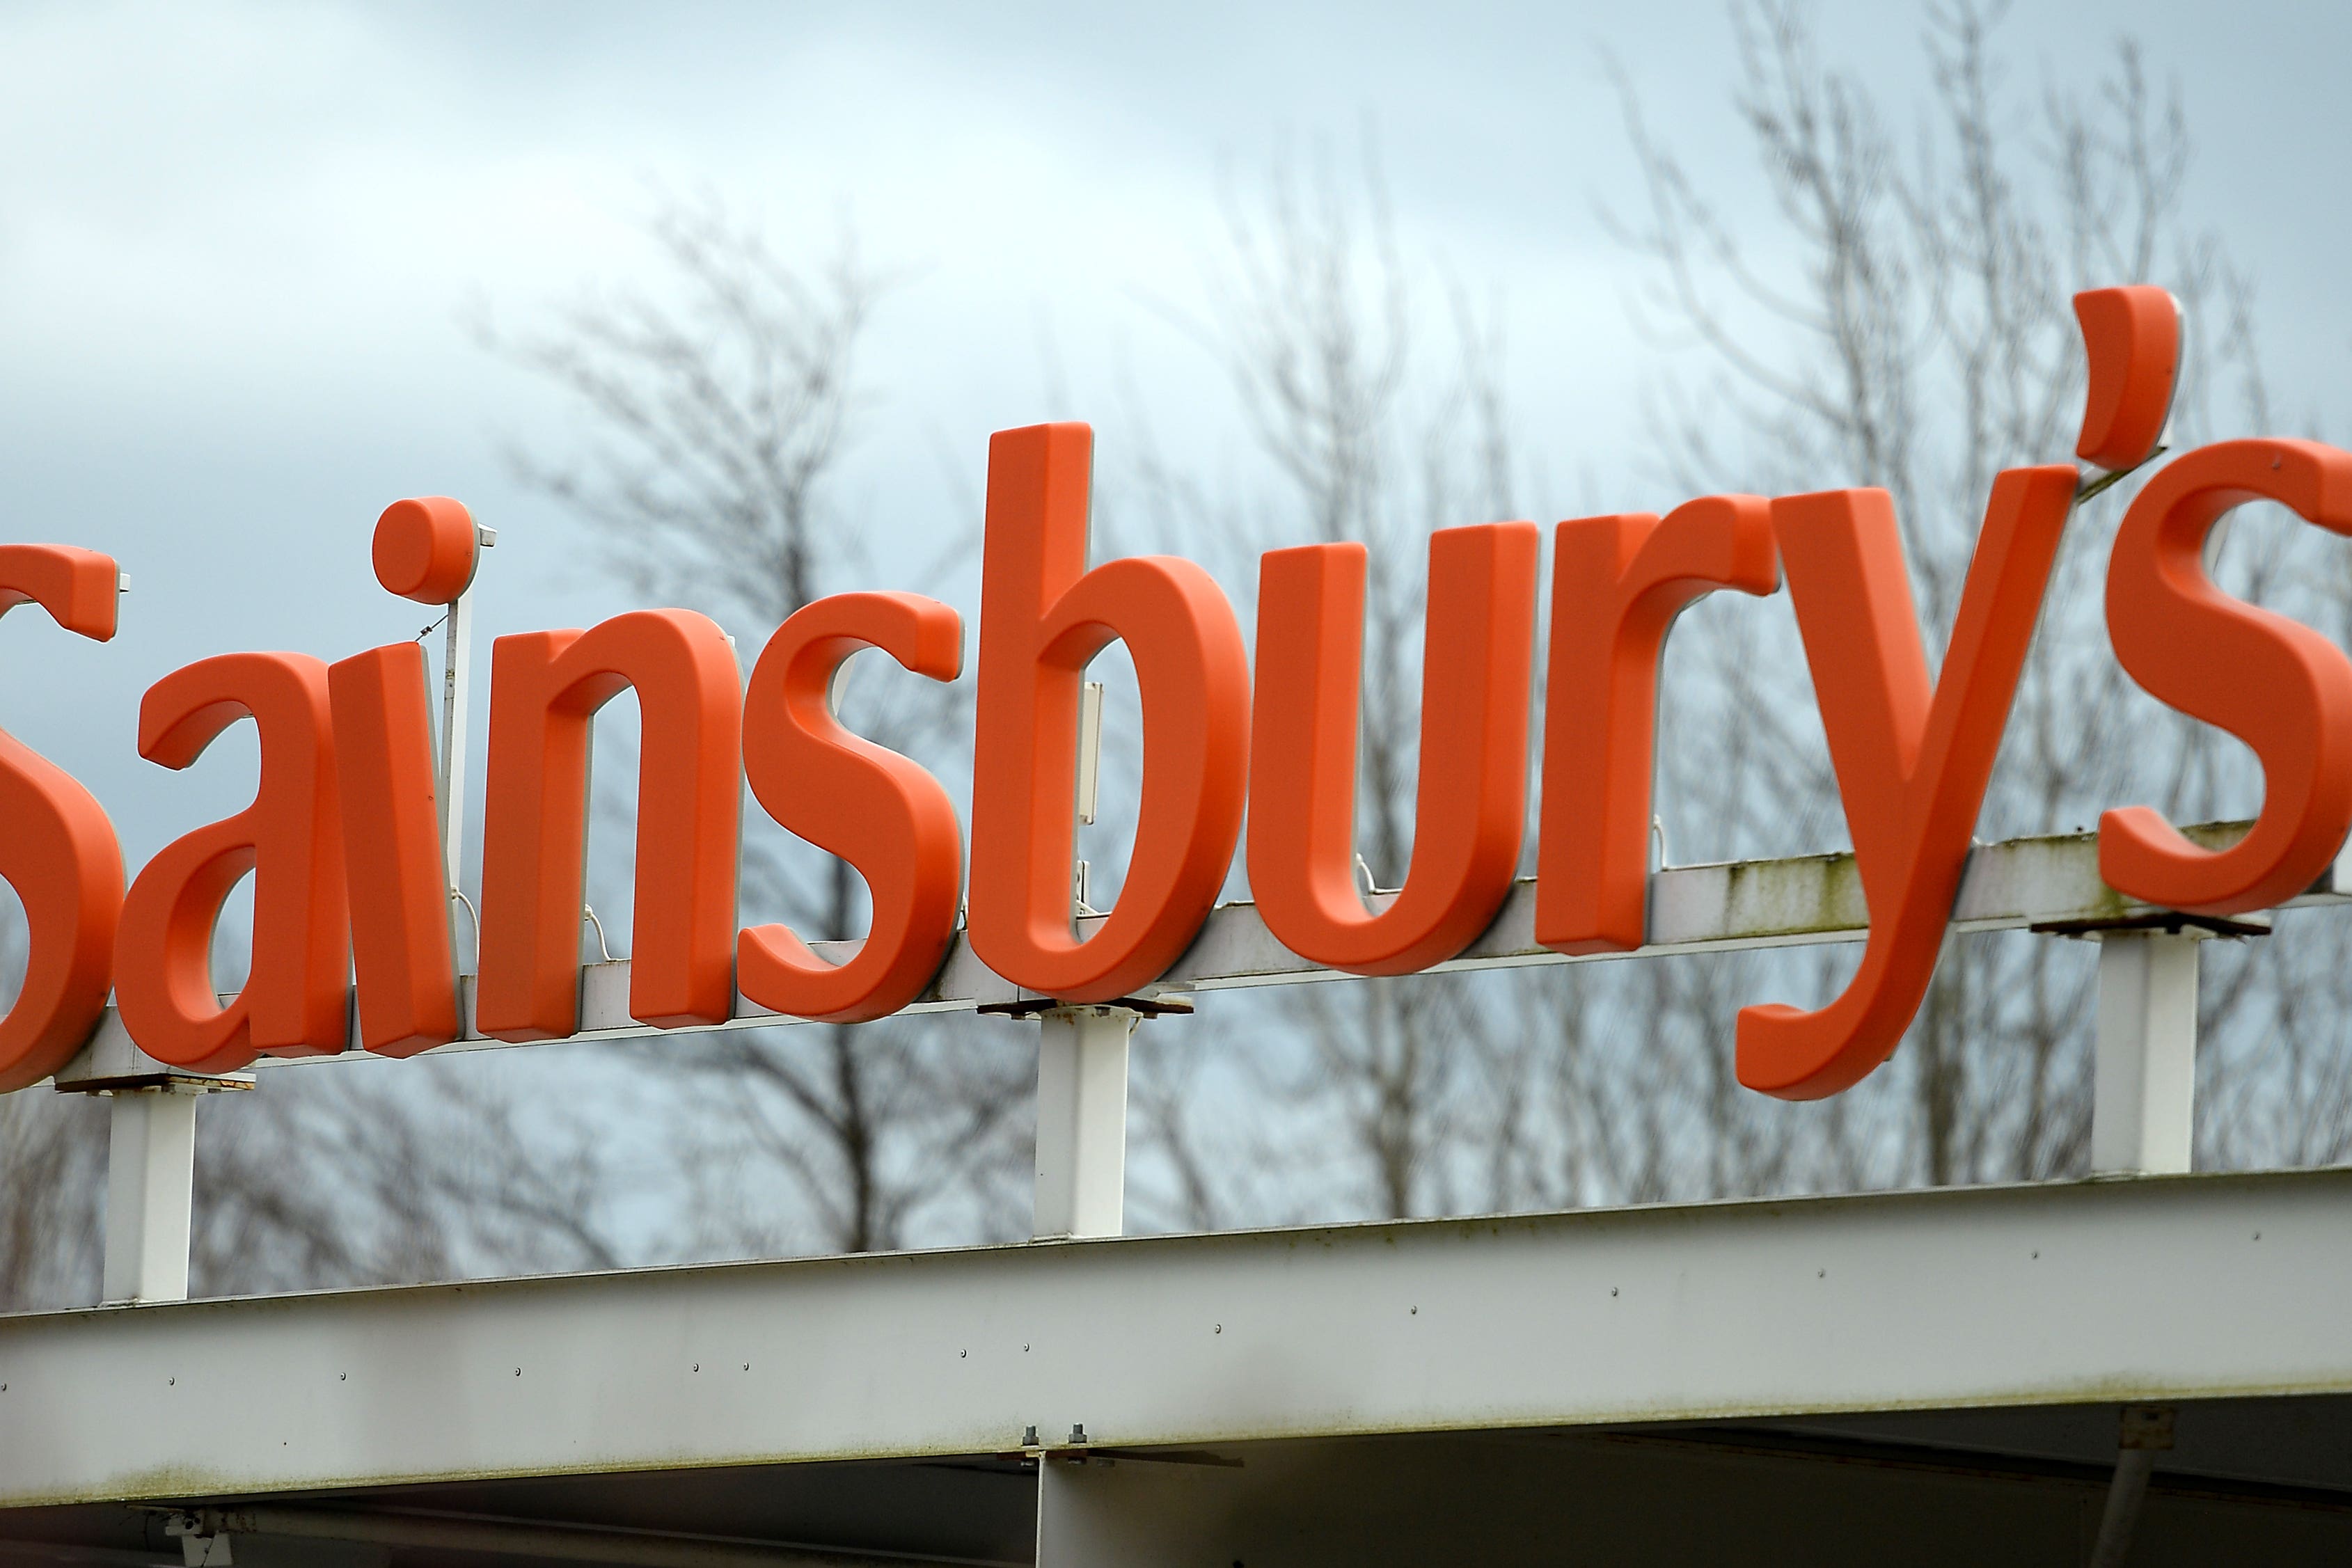 Sainsbury’s outlined plans to open another 75 convenience stores